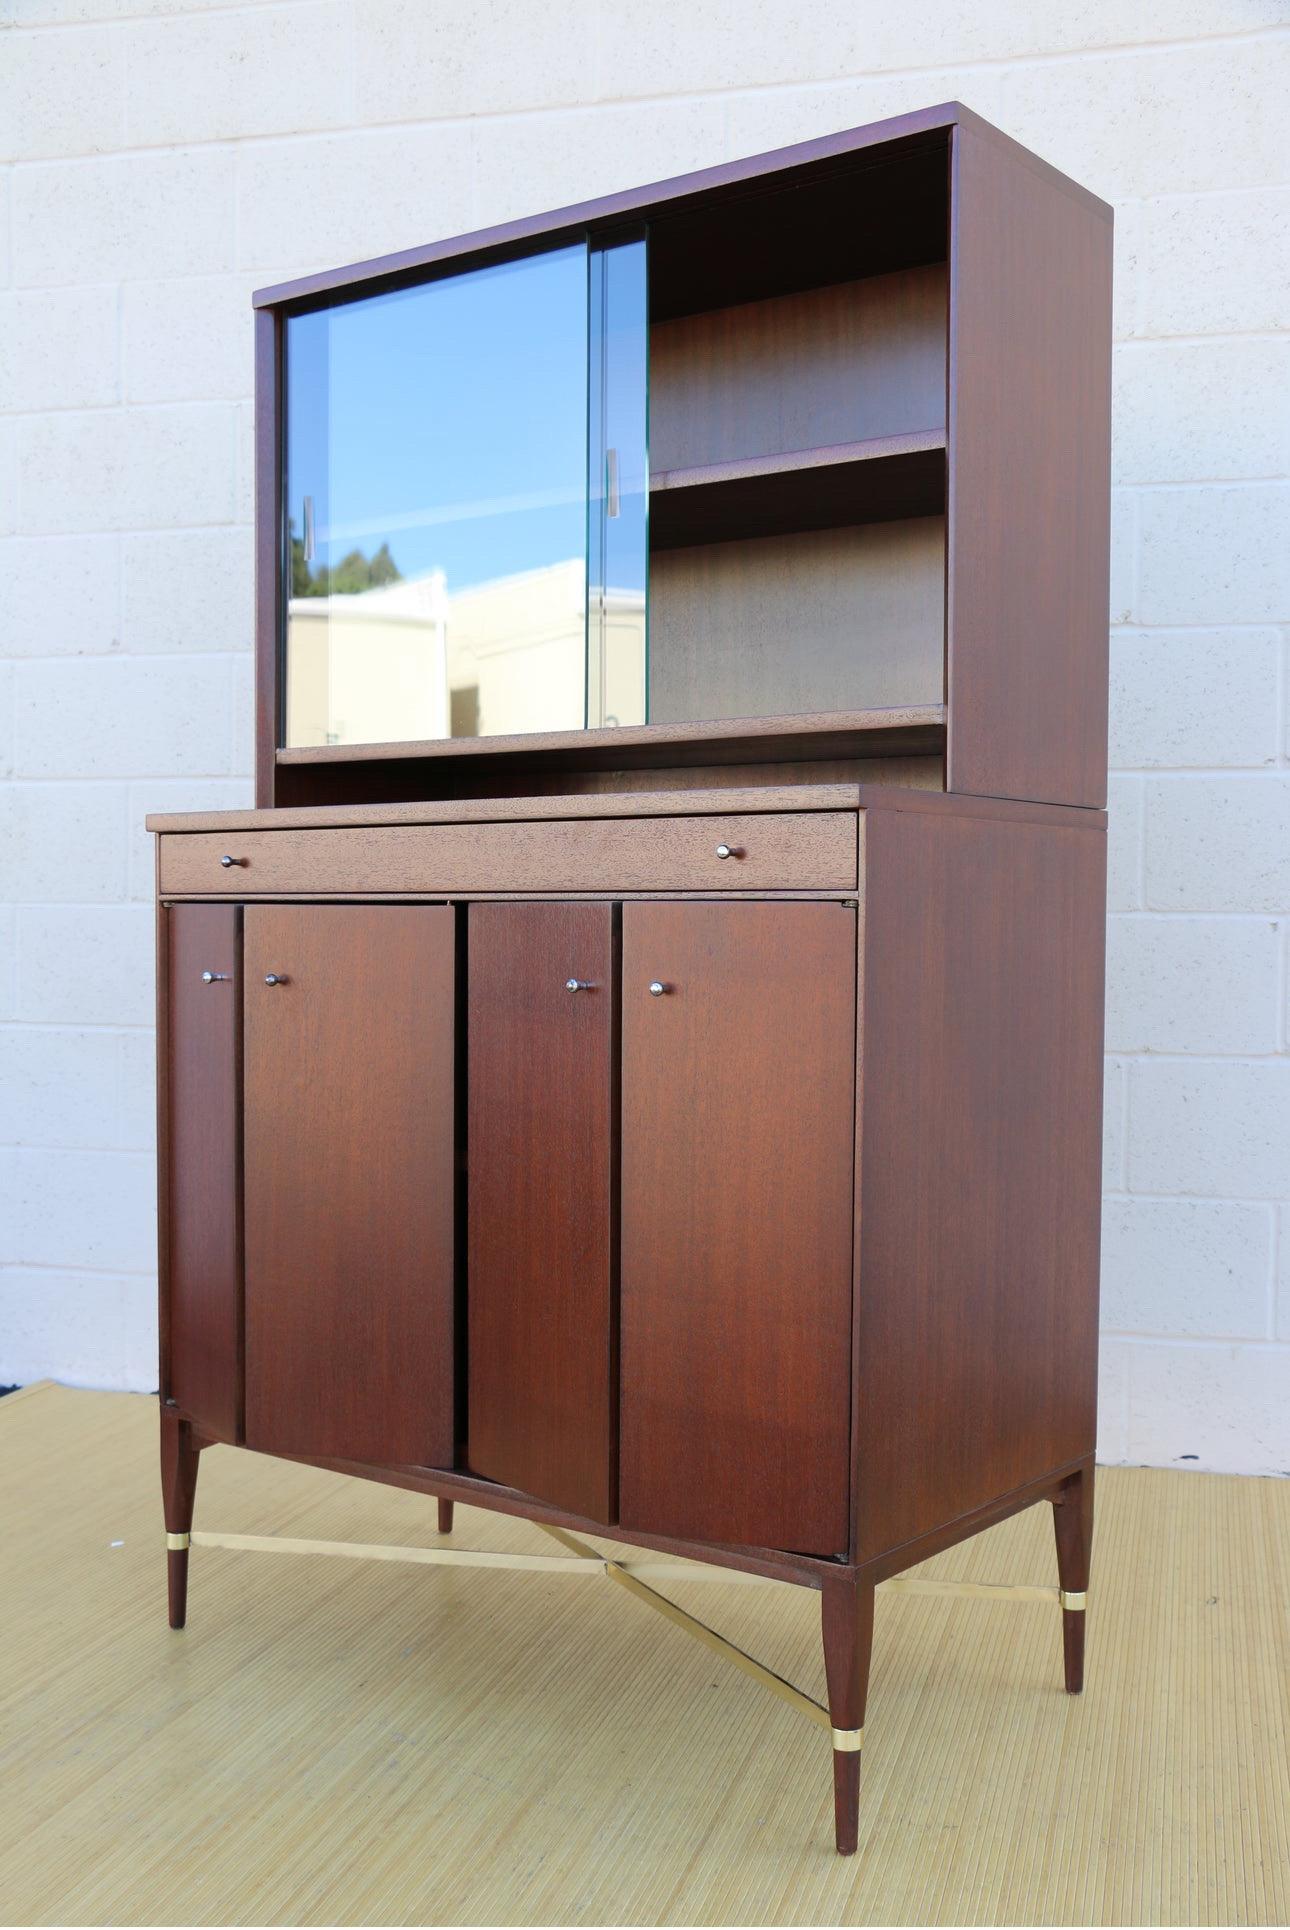 Amazing storage cabinet designed by Paul McCobb and produced by Calvin for the 